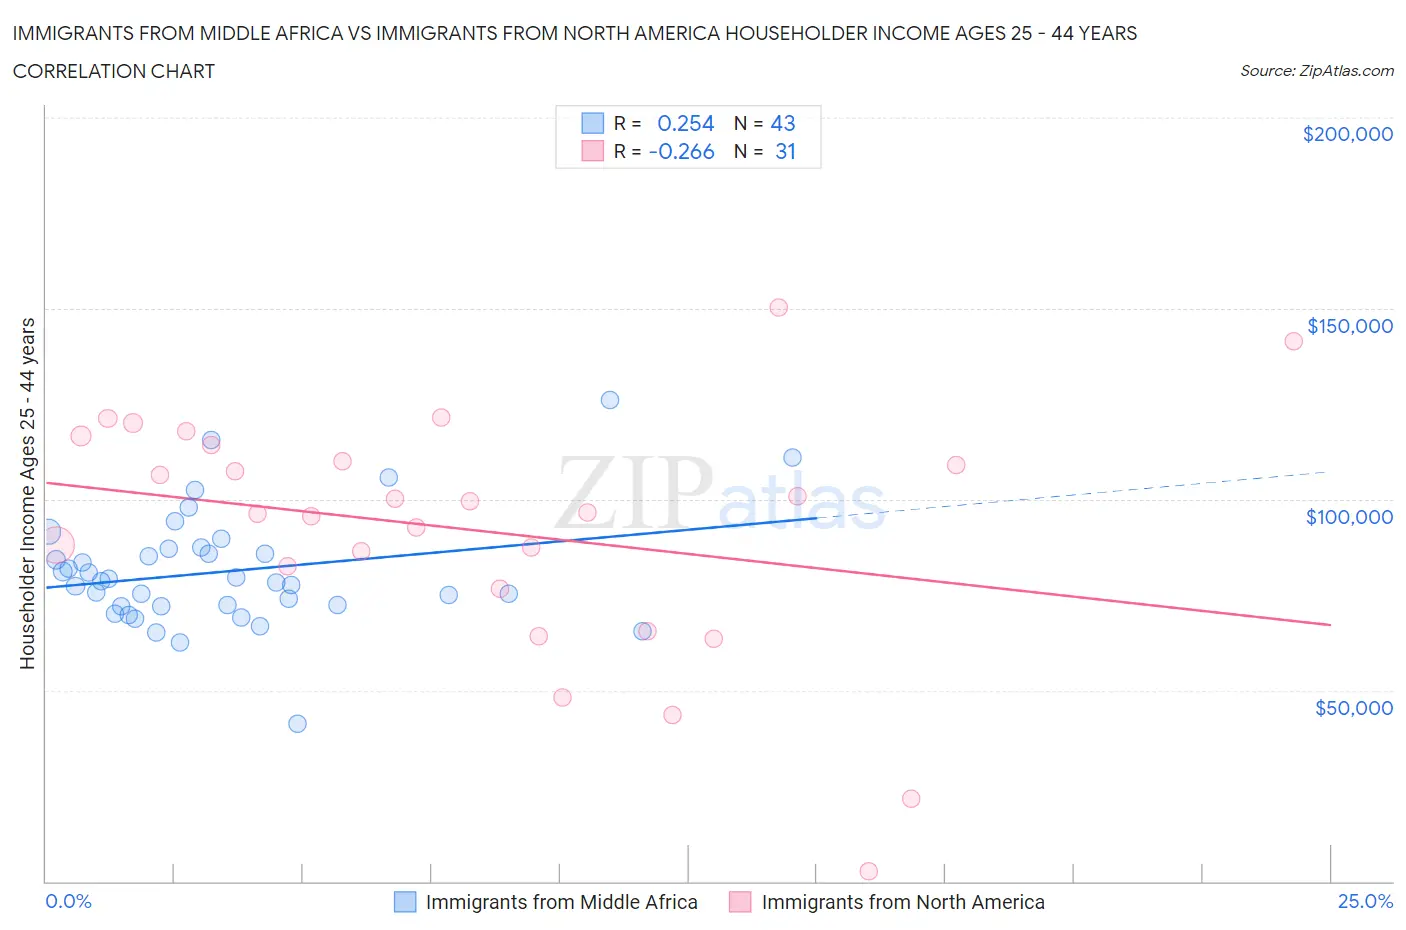 Immigrants from Middle Africa vs Immigrants from North America Householder Income Ages 25 - 44 years